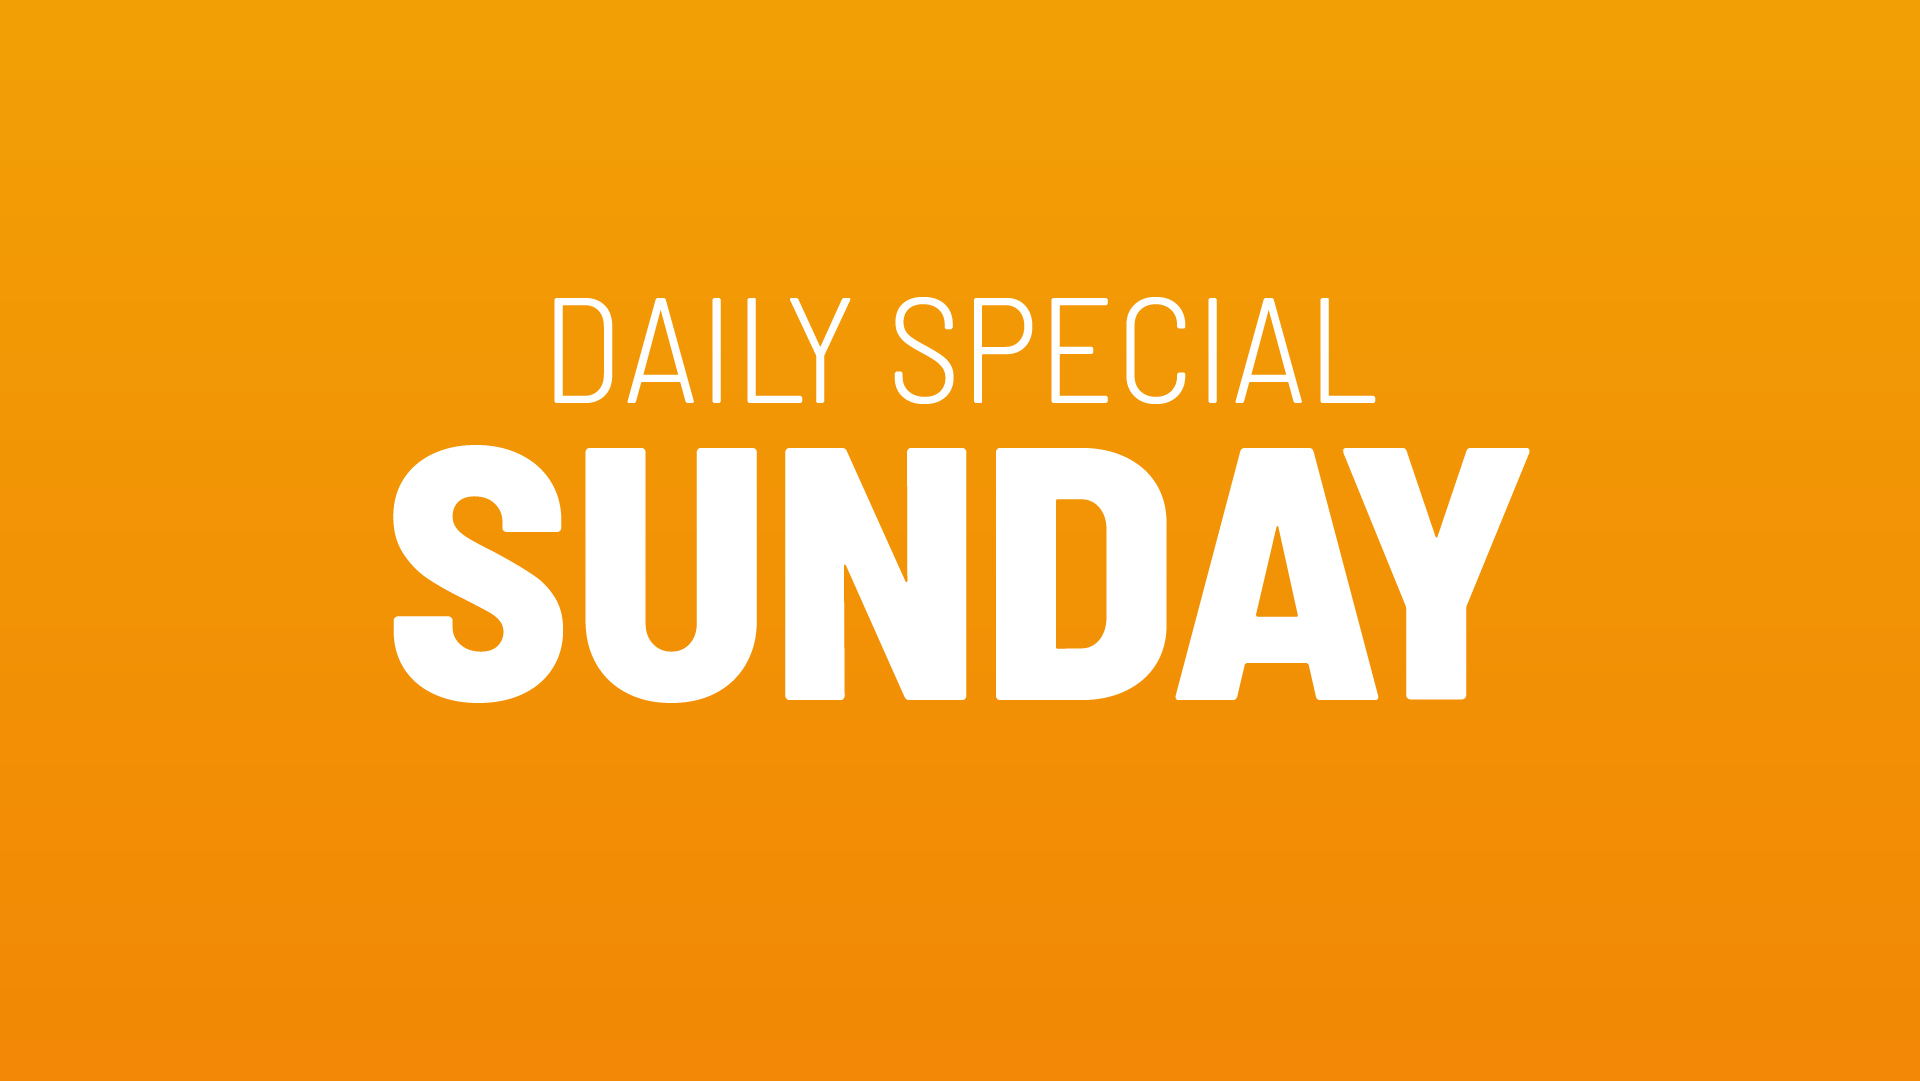 Sunday's Daily Special